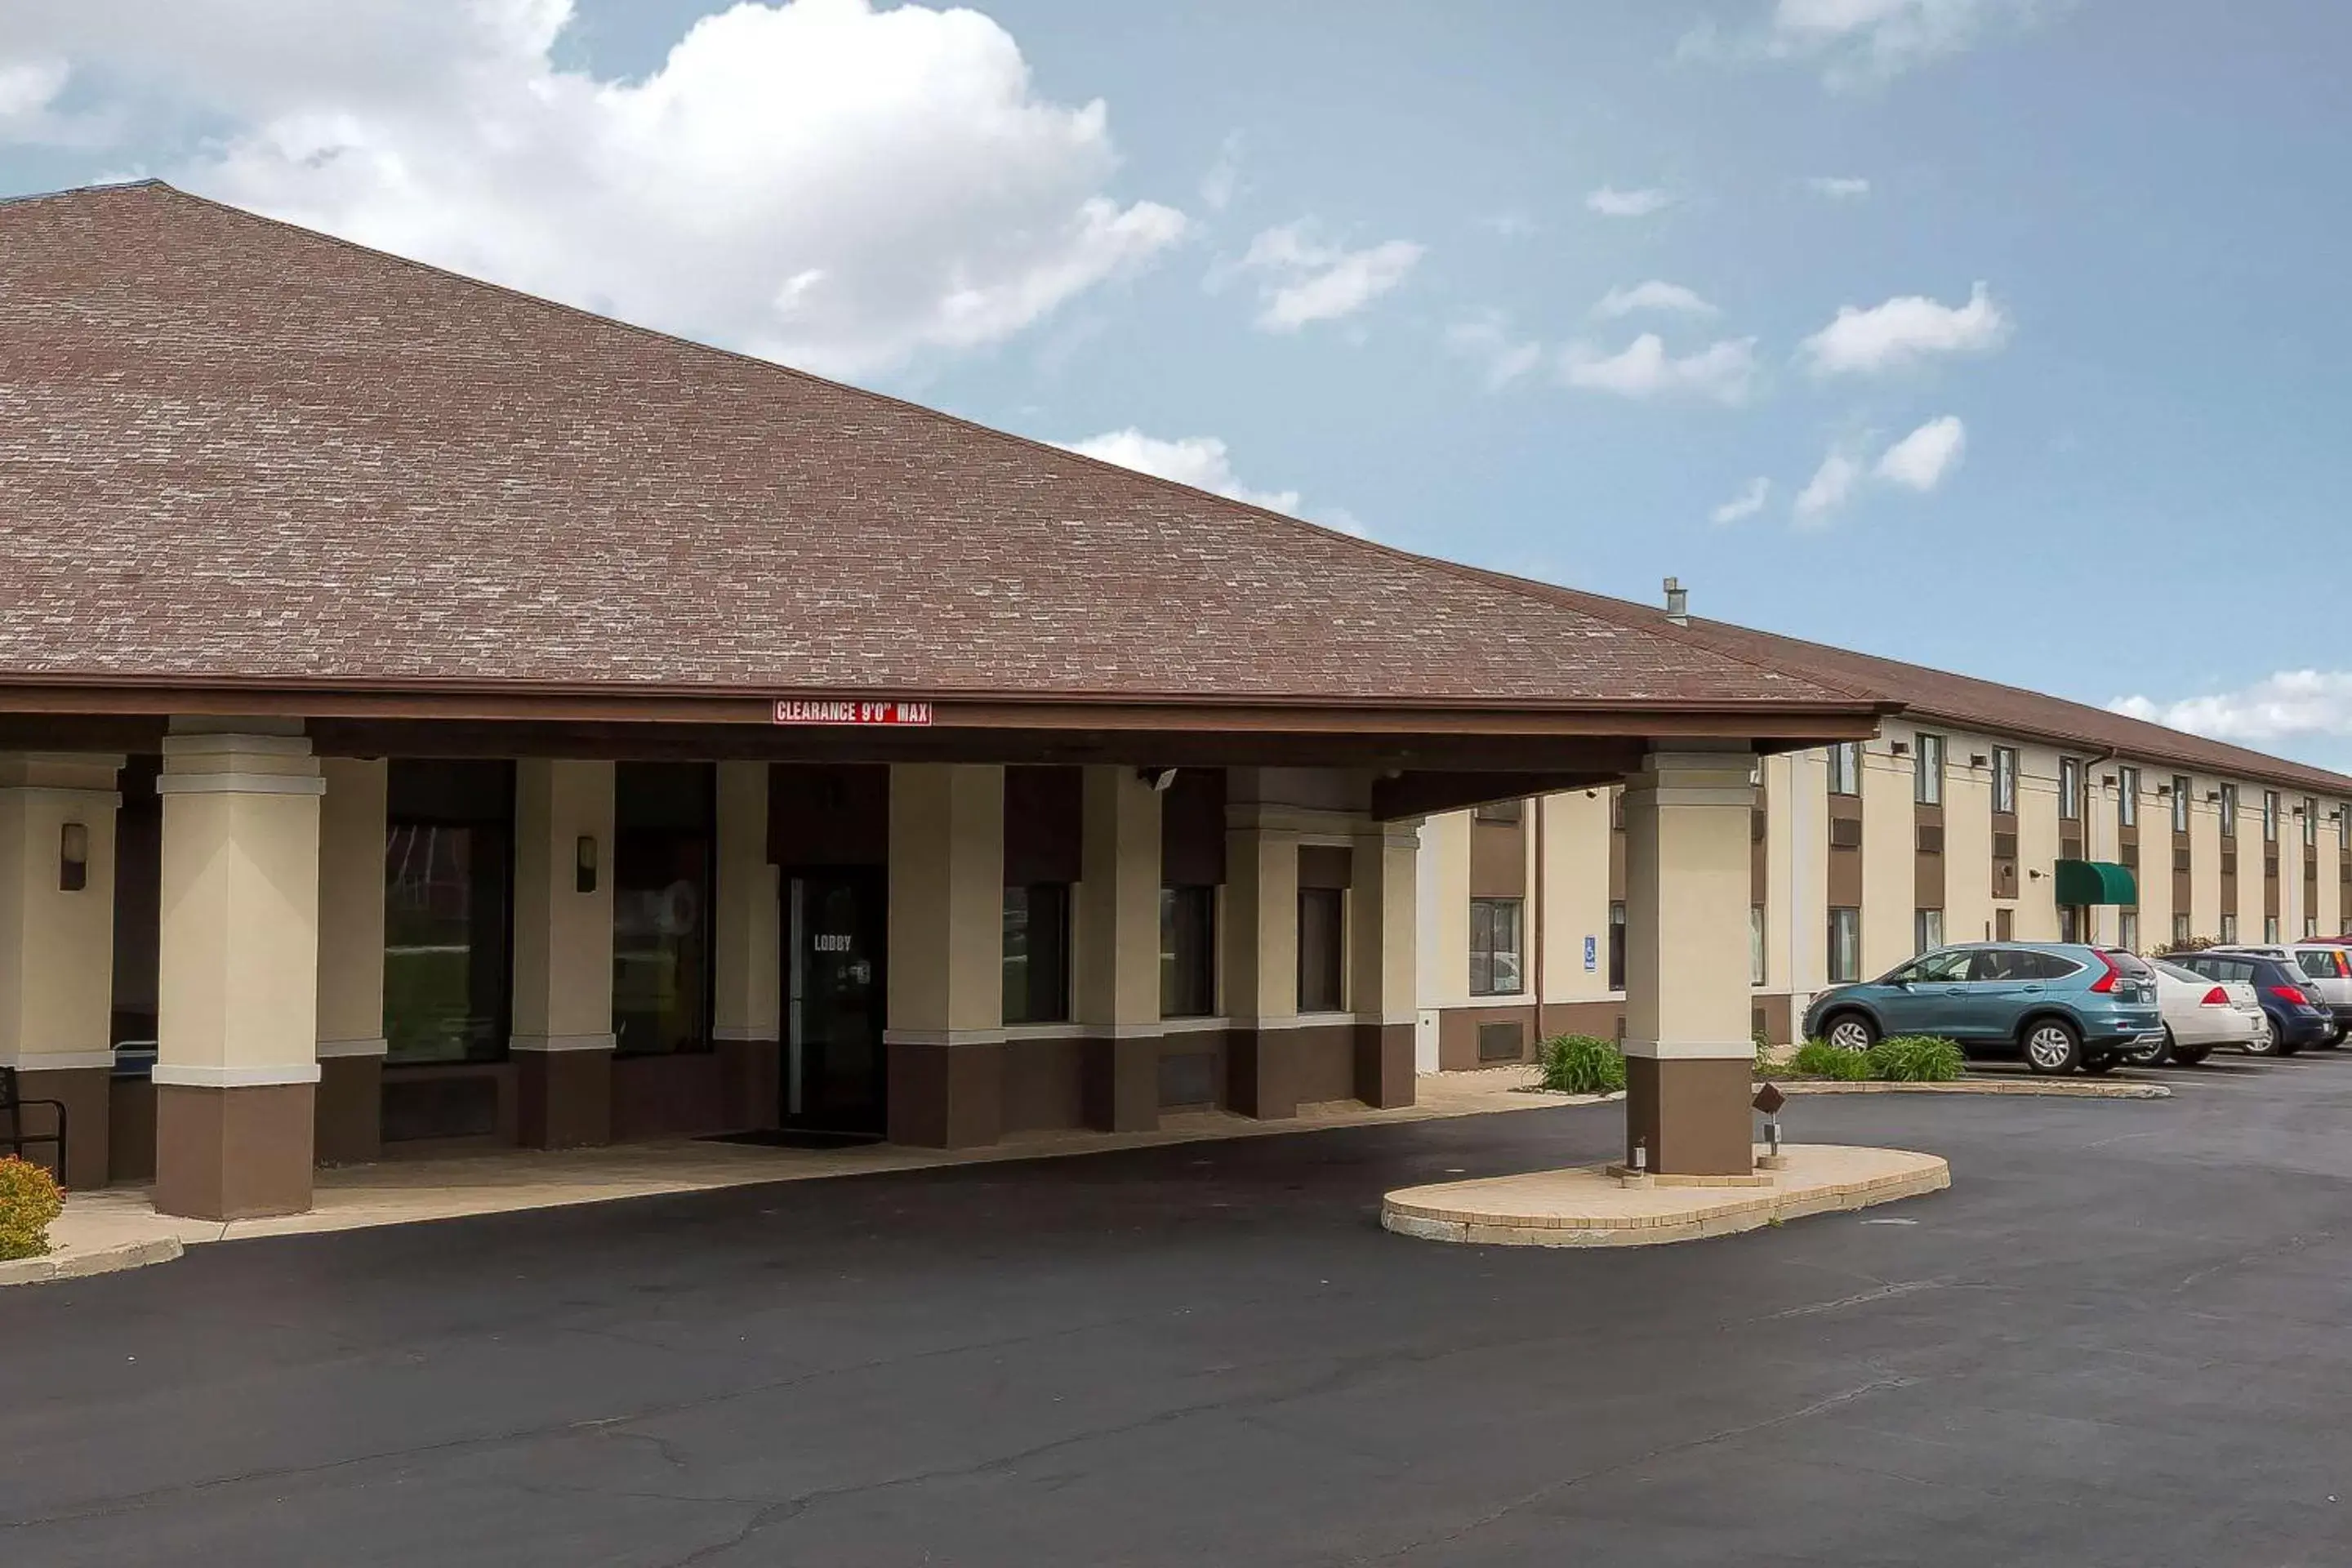 Property Building in Quality Inn Sycamore - DeKalb